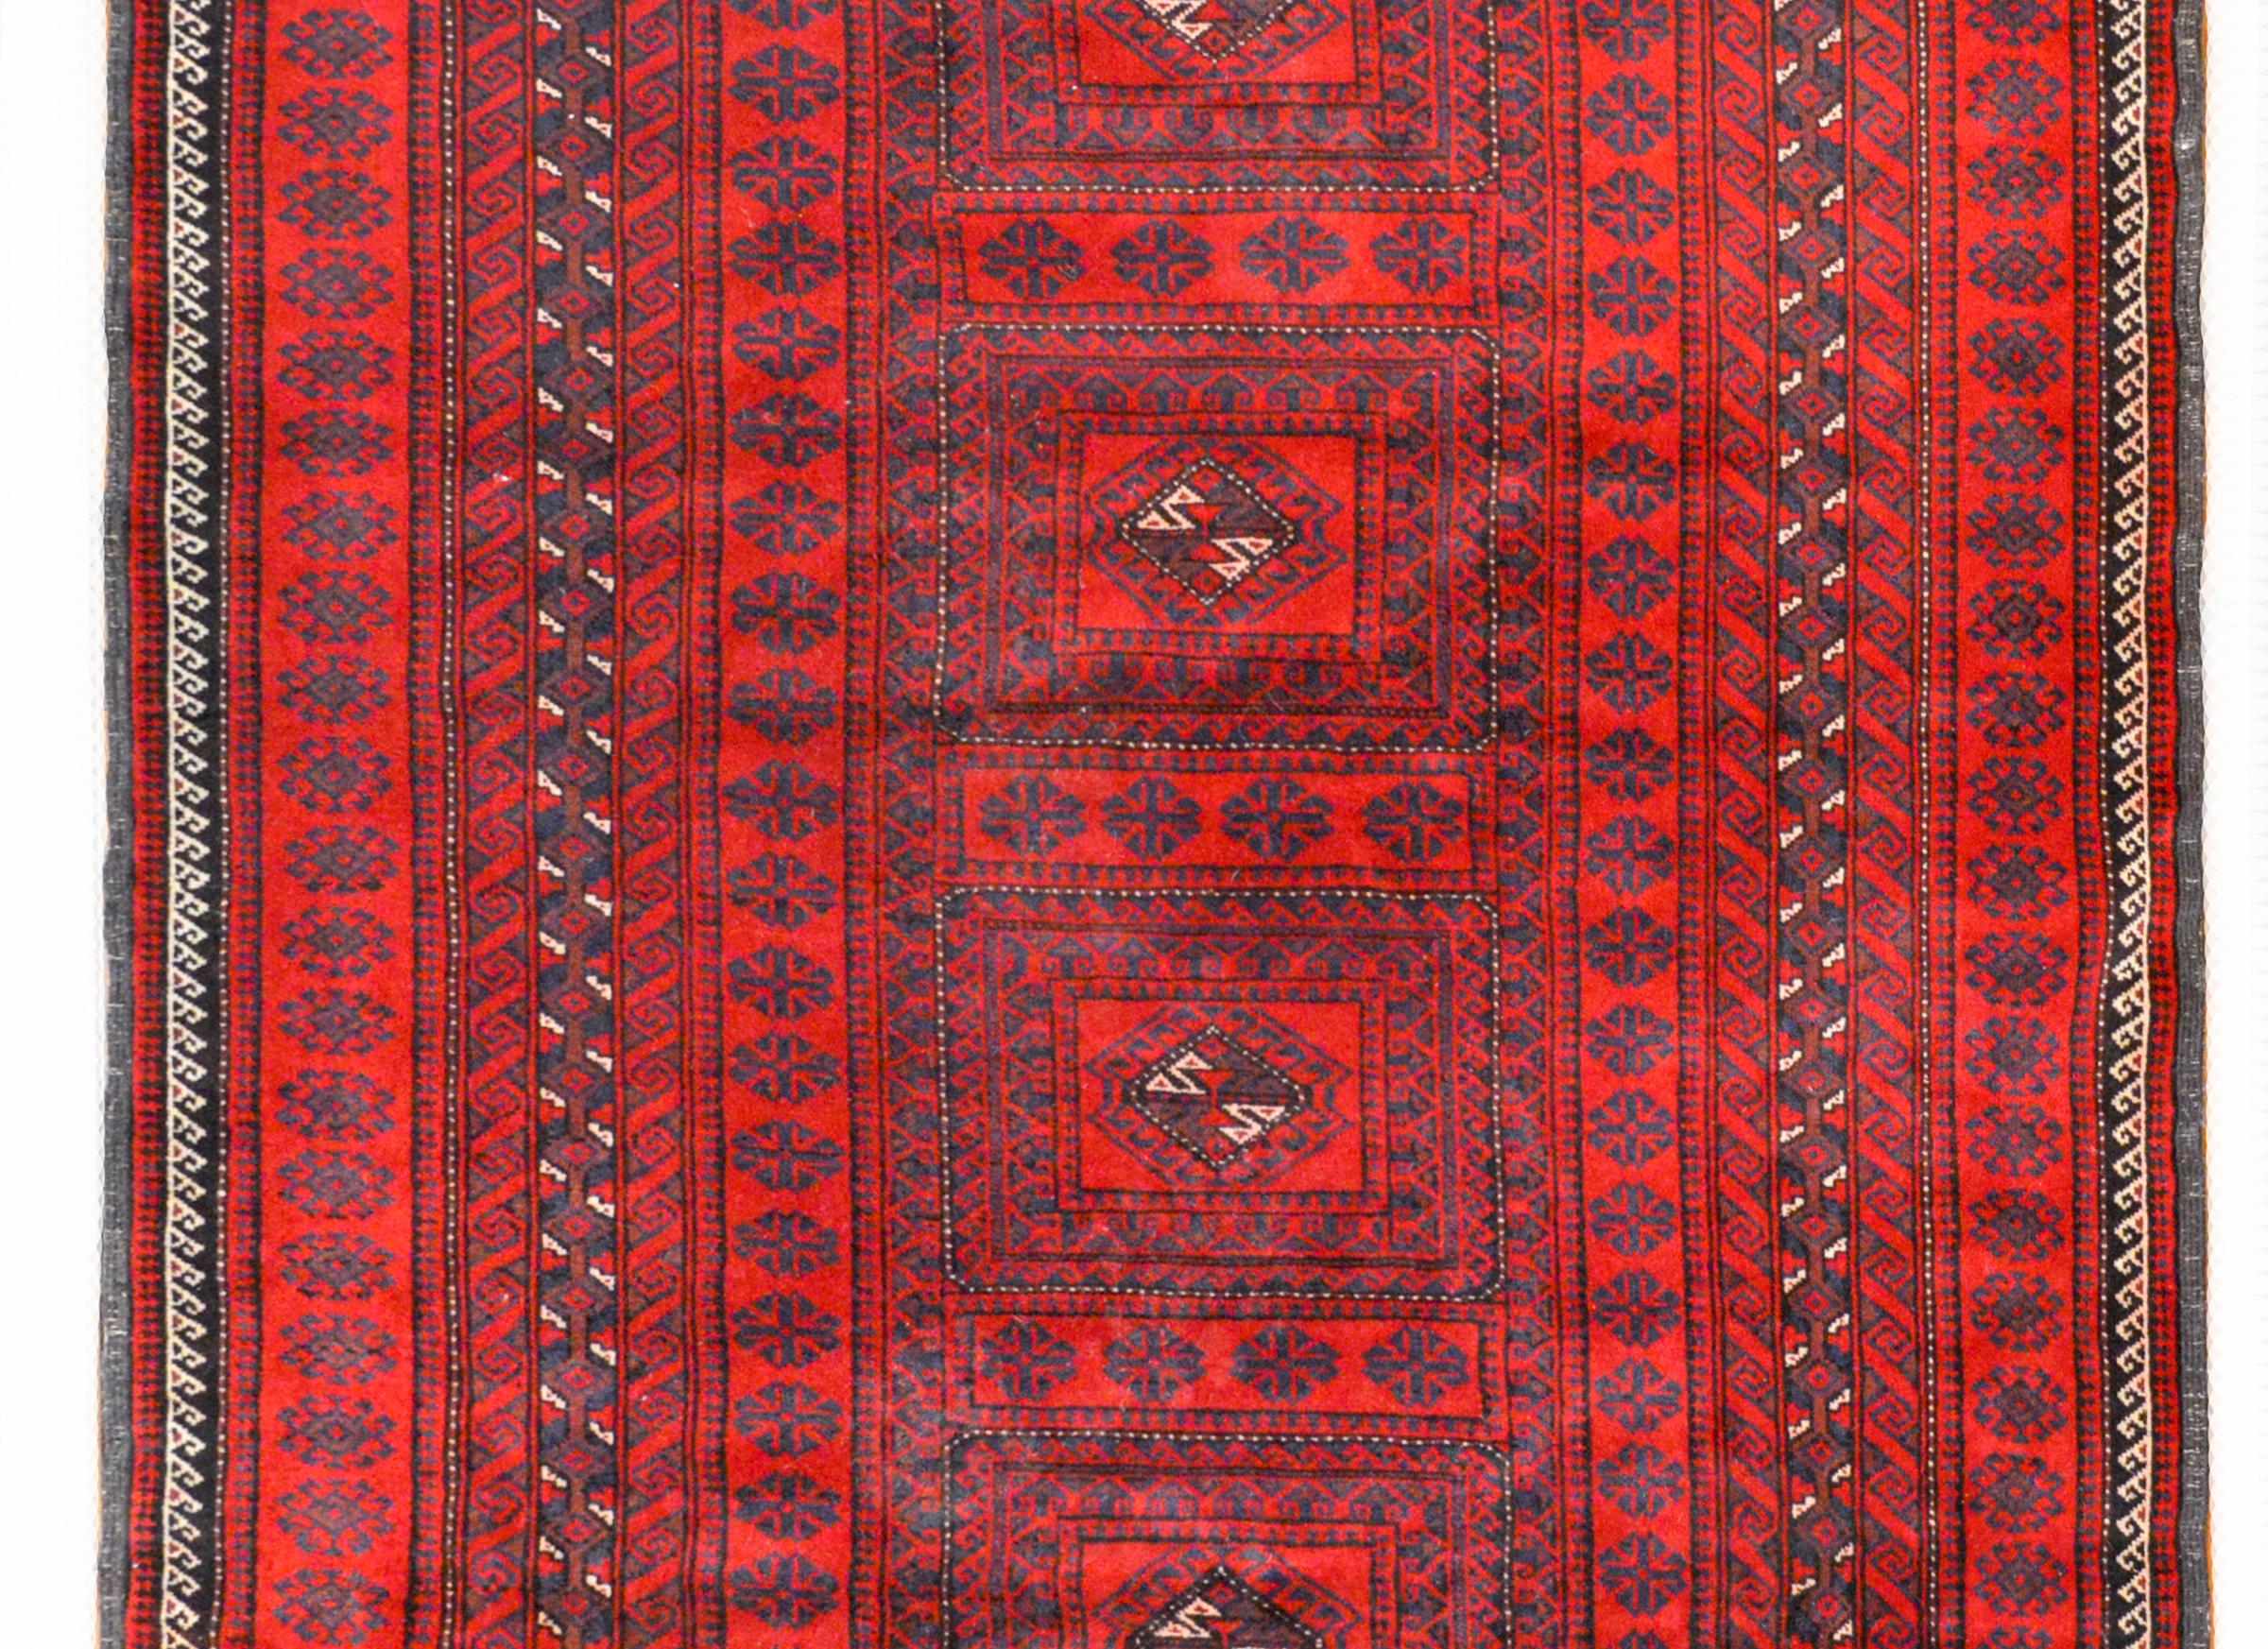 A beautiful mid-20th century Afghani Turkmen rug with six square medallions surrounded by an elaborate and wide border composed of myriad geometric and floral patterned stripes all woven in light and dark indigo, and white vegetable dyed wool